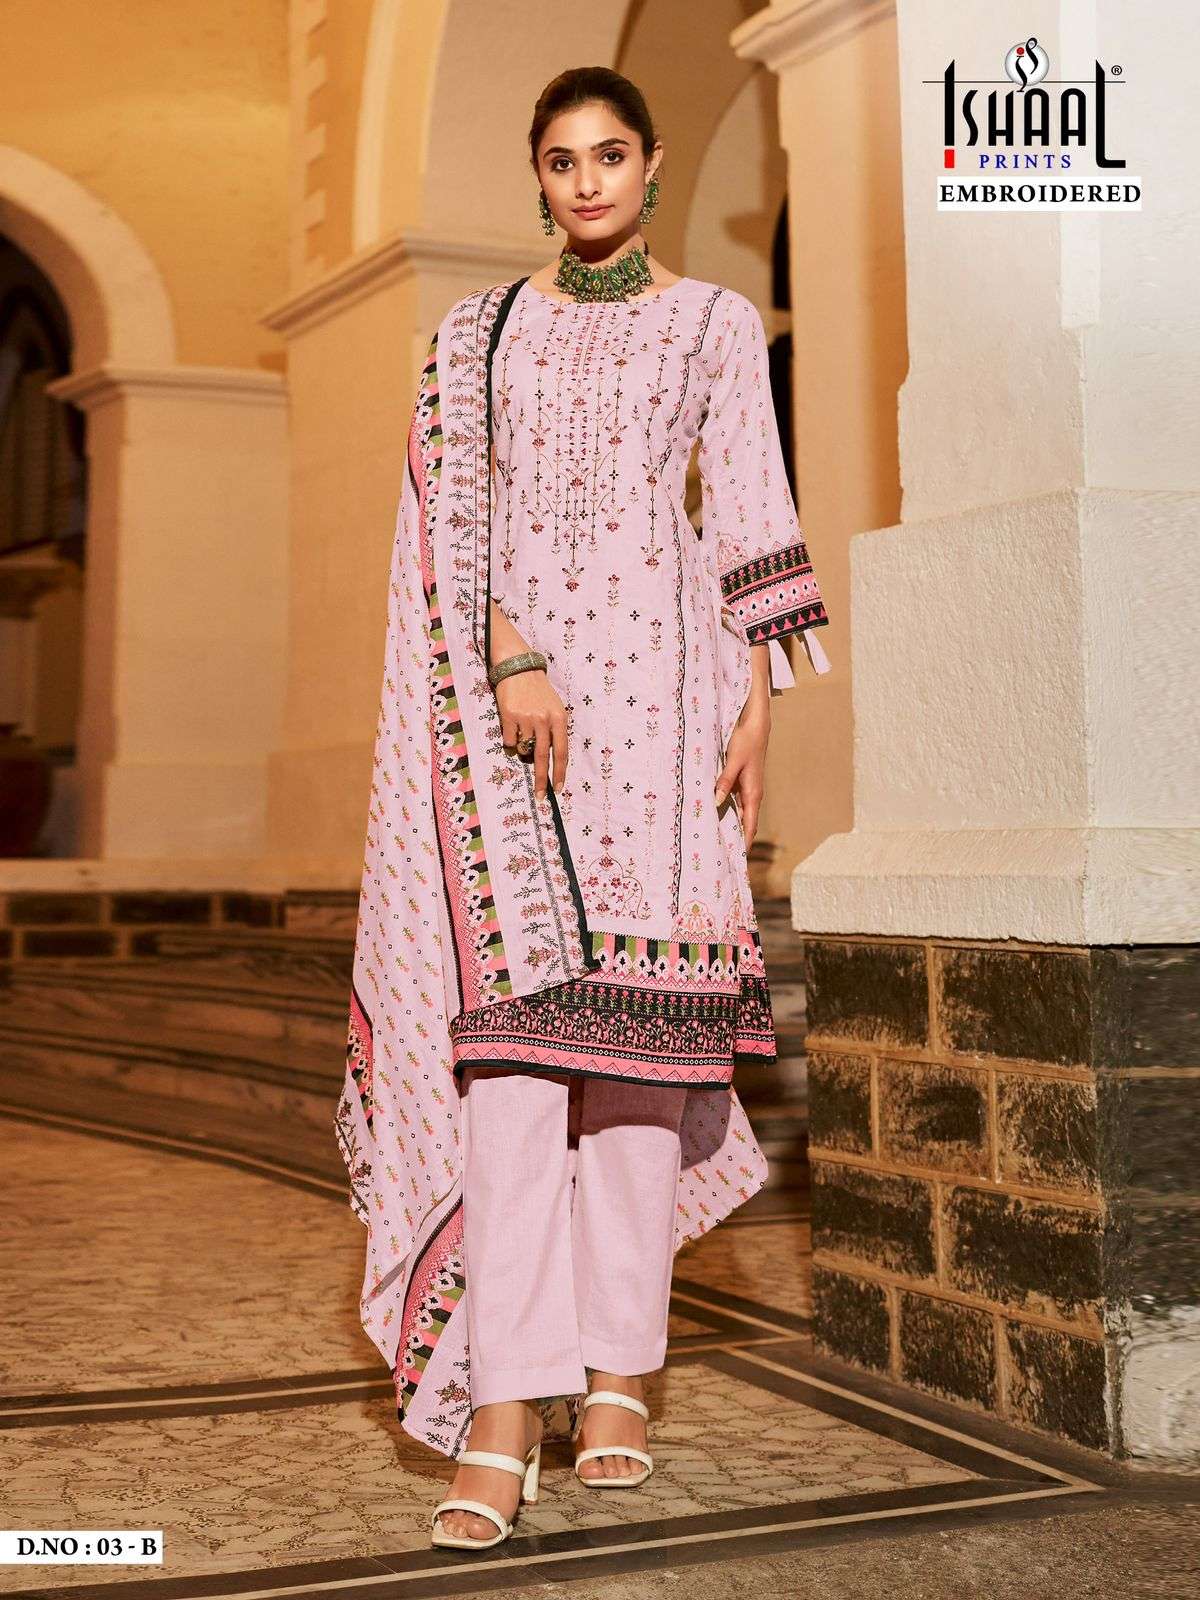 ISHAAL PRINTS EMBROIDERED D NO 03 